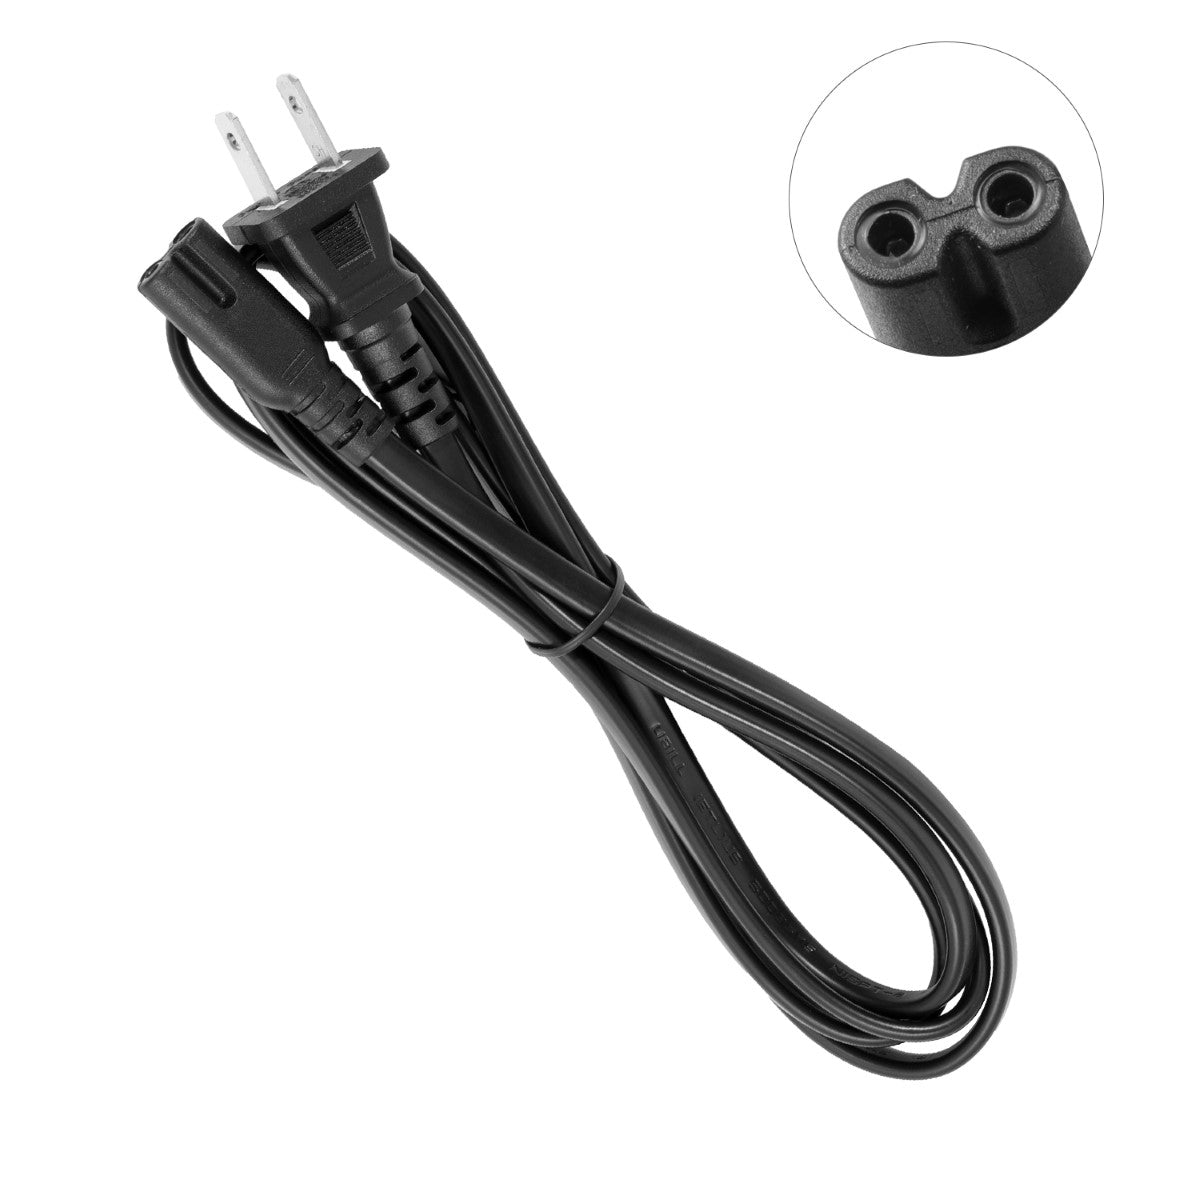 Power Cord for HP ENVY 5644 e-All-in-One Printer.